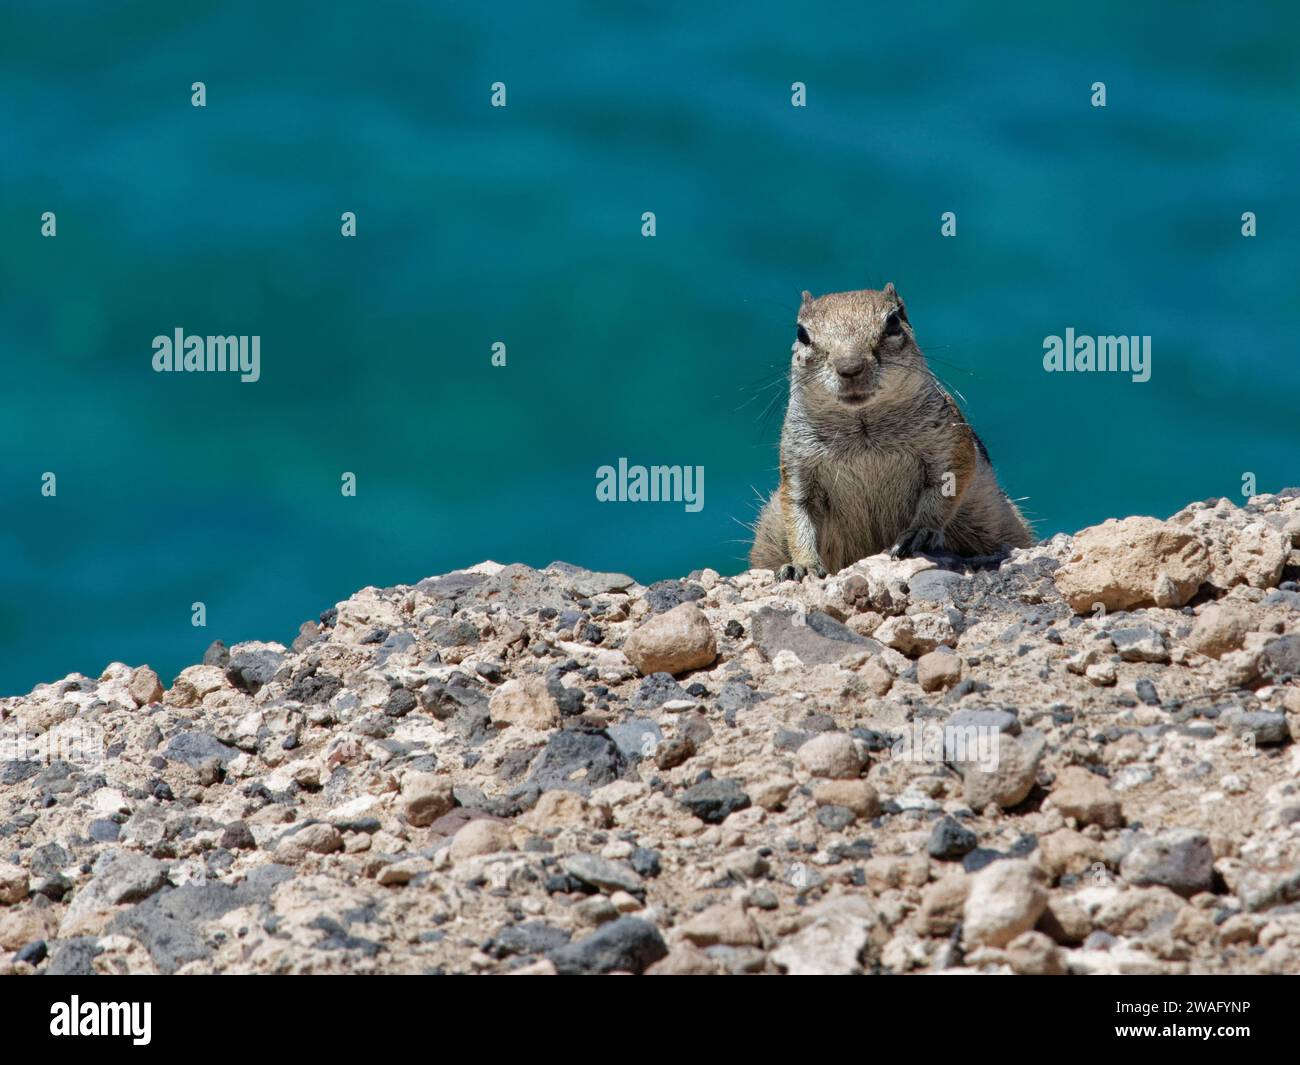 Barbary ground squirrel (Atlantoxerus getulus) peering over a cliff edge with the sea in the background, Fuerteventura, Canary Islands, September. Stock Photo